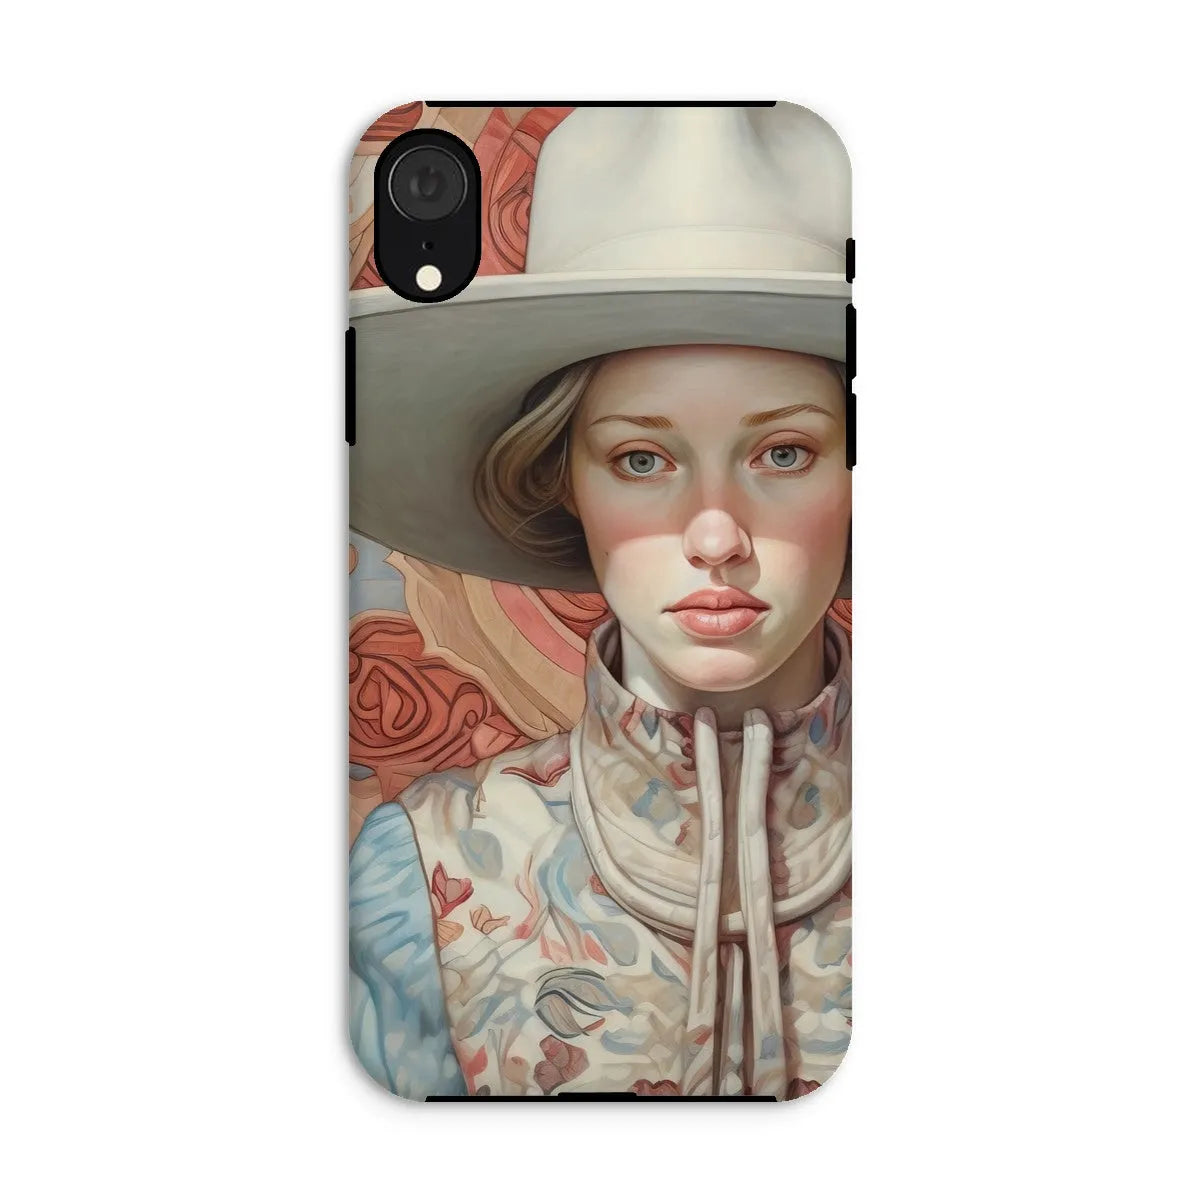 Lottie The Lesbian Cowgirl - Sapphic Art Phone Case - Iphone Xr / Matte - Mobile Phone Cases - Aesthetic Art